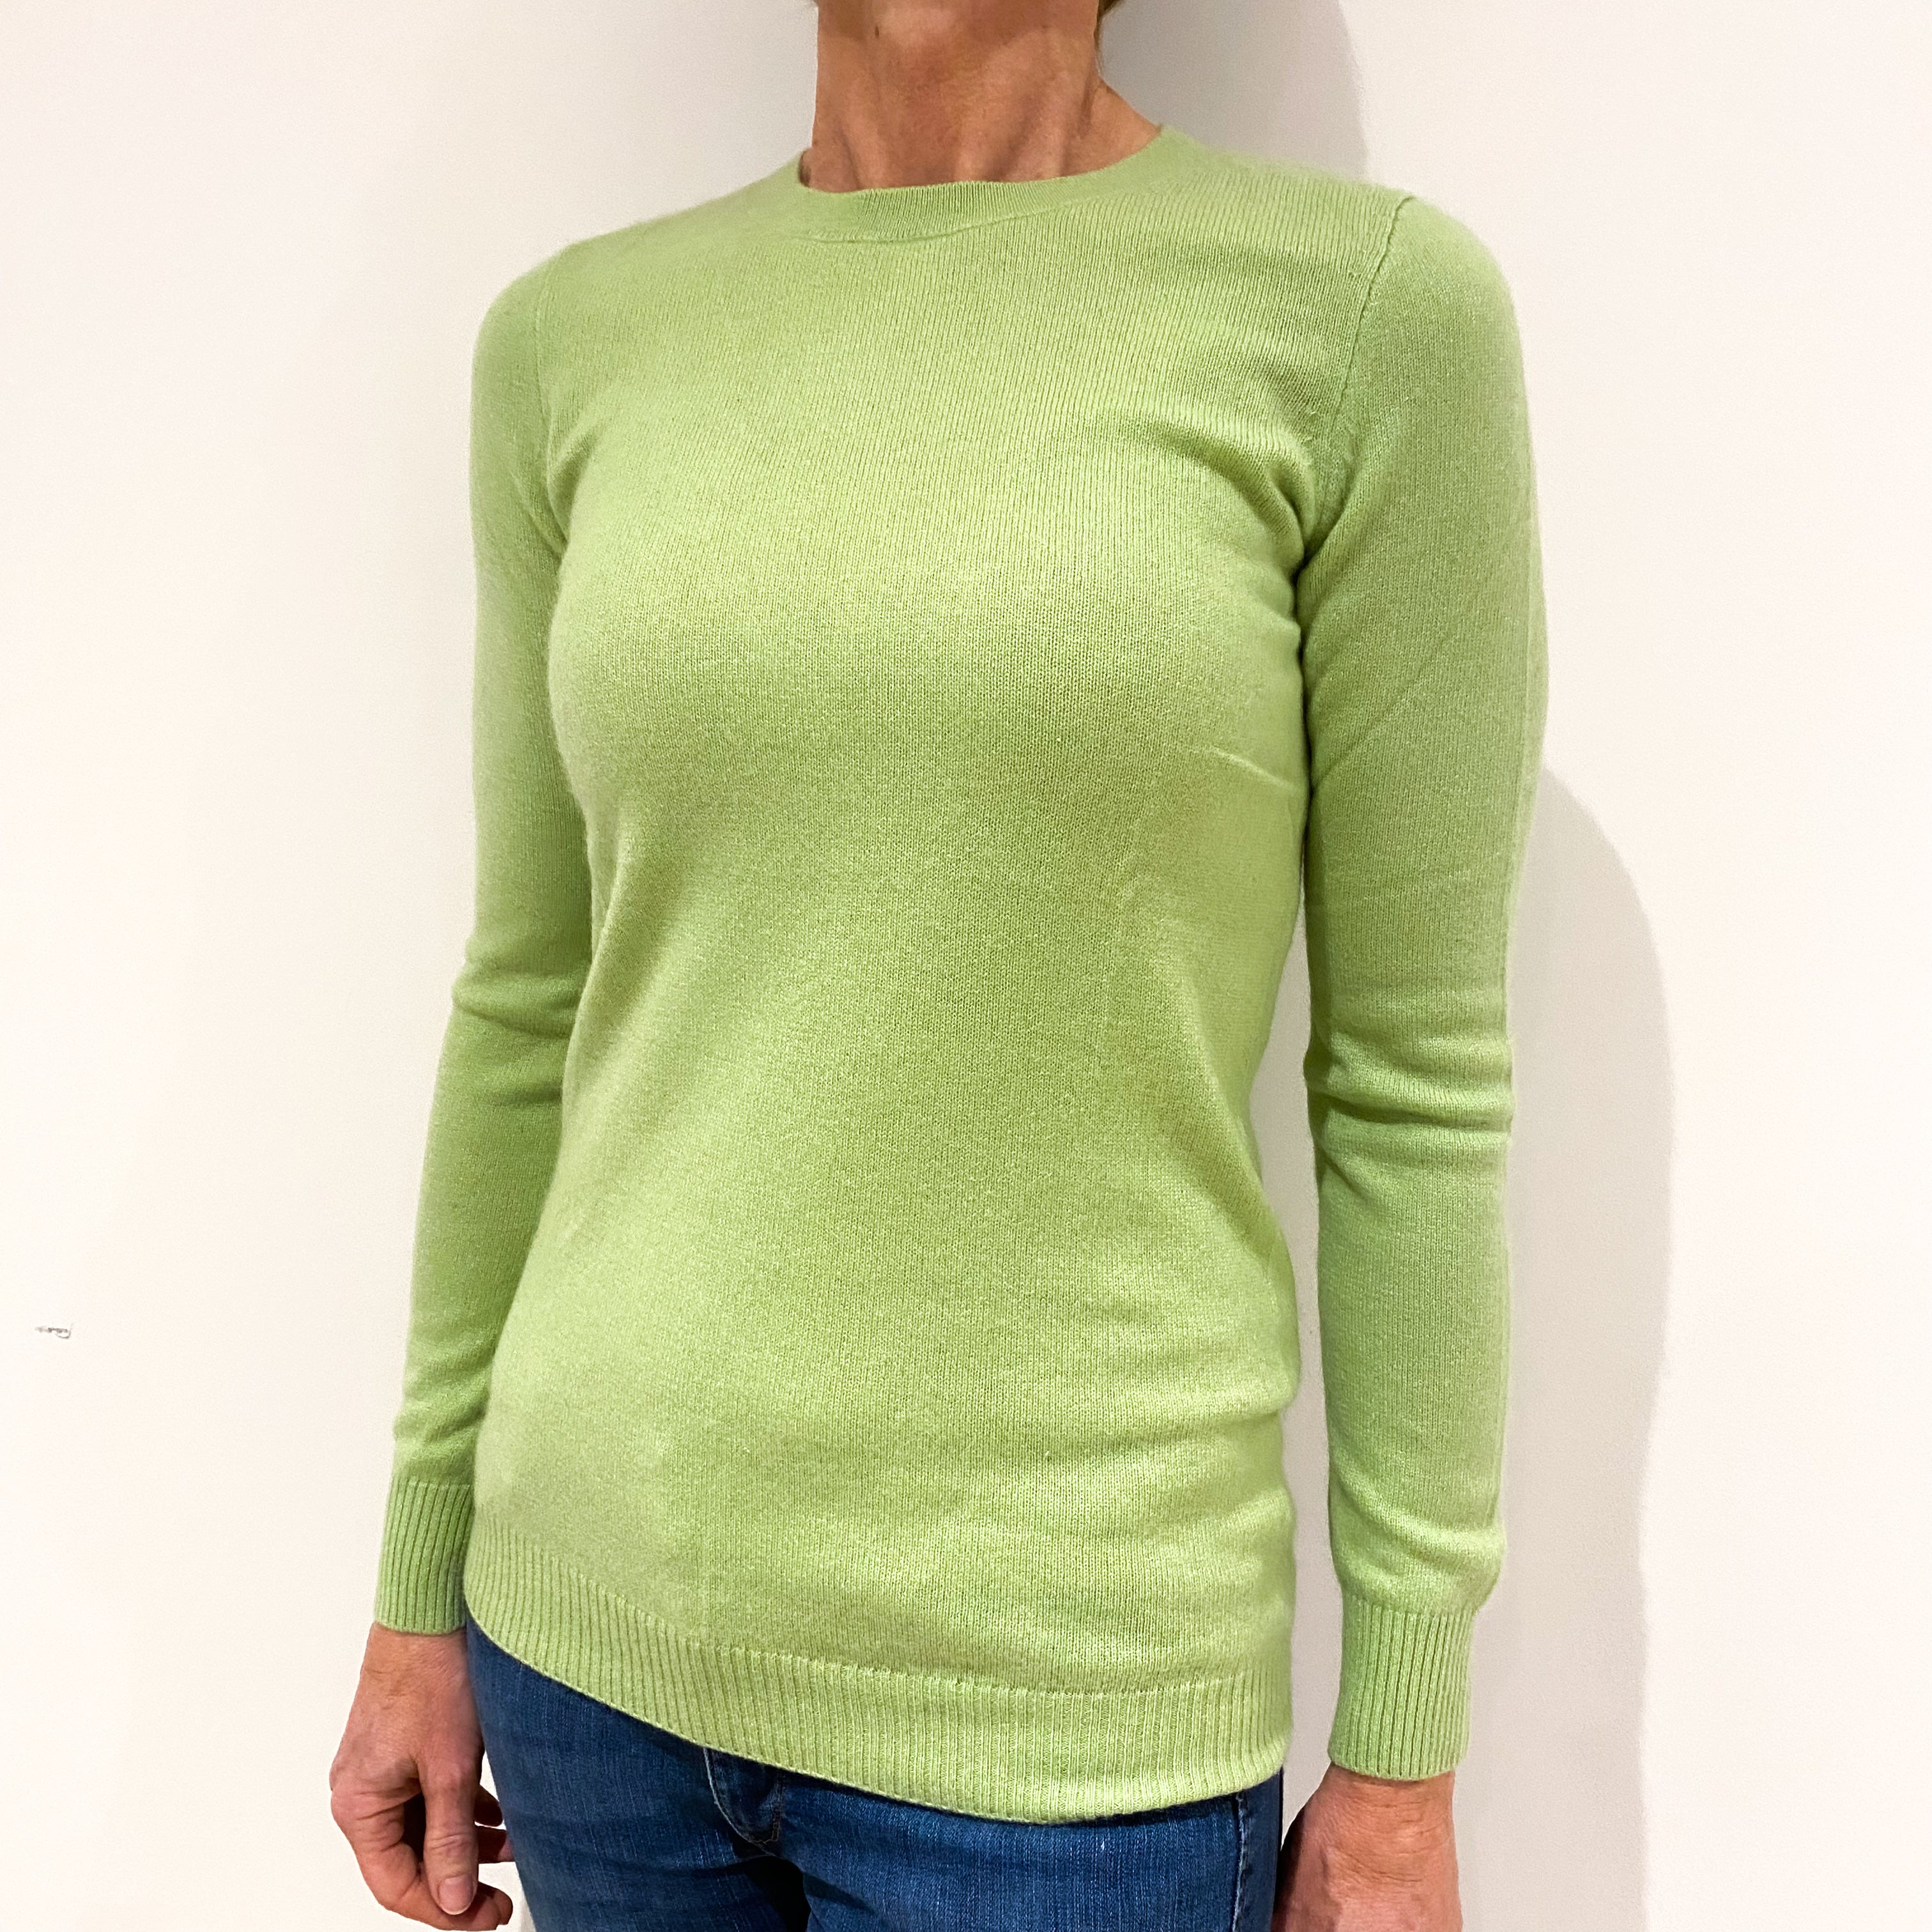 Soft Lime Cashmere Crew Neck Jumper Small